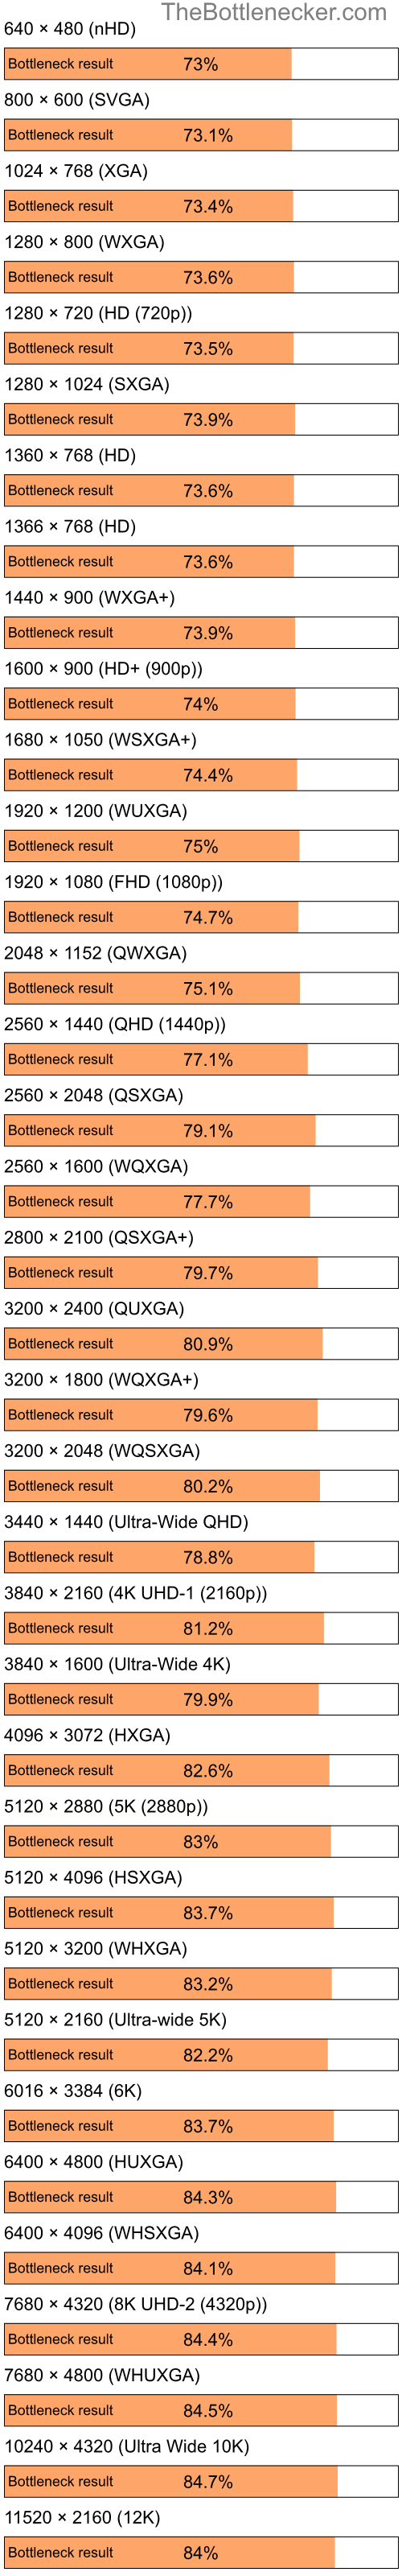 Bottleneck results by resolution for Intel Pentium 4 and NVIDIA GeForce 6610 XL in Graphic Card Intense Tasks